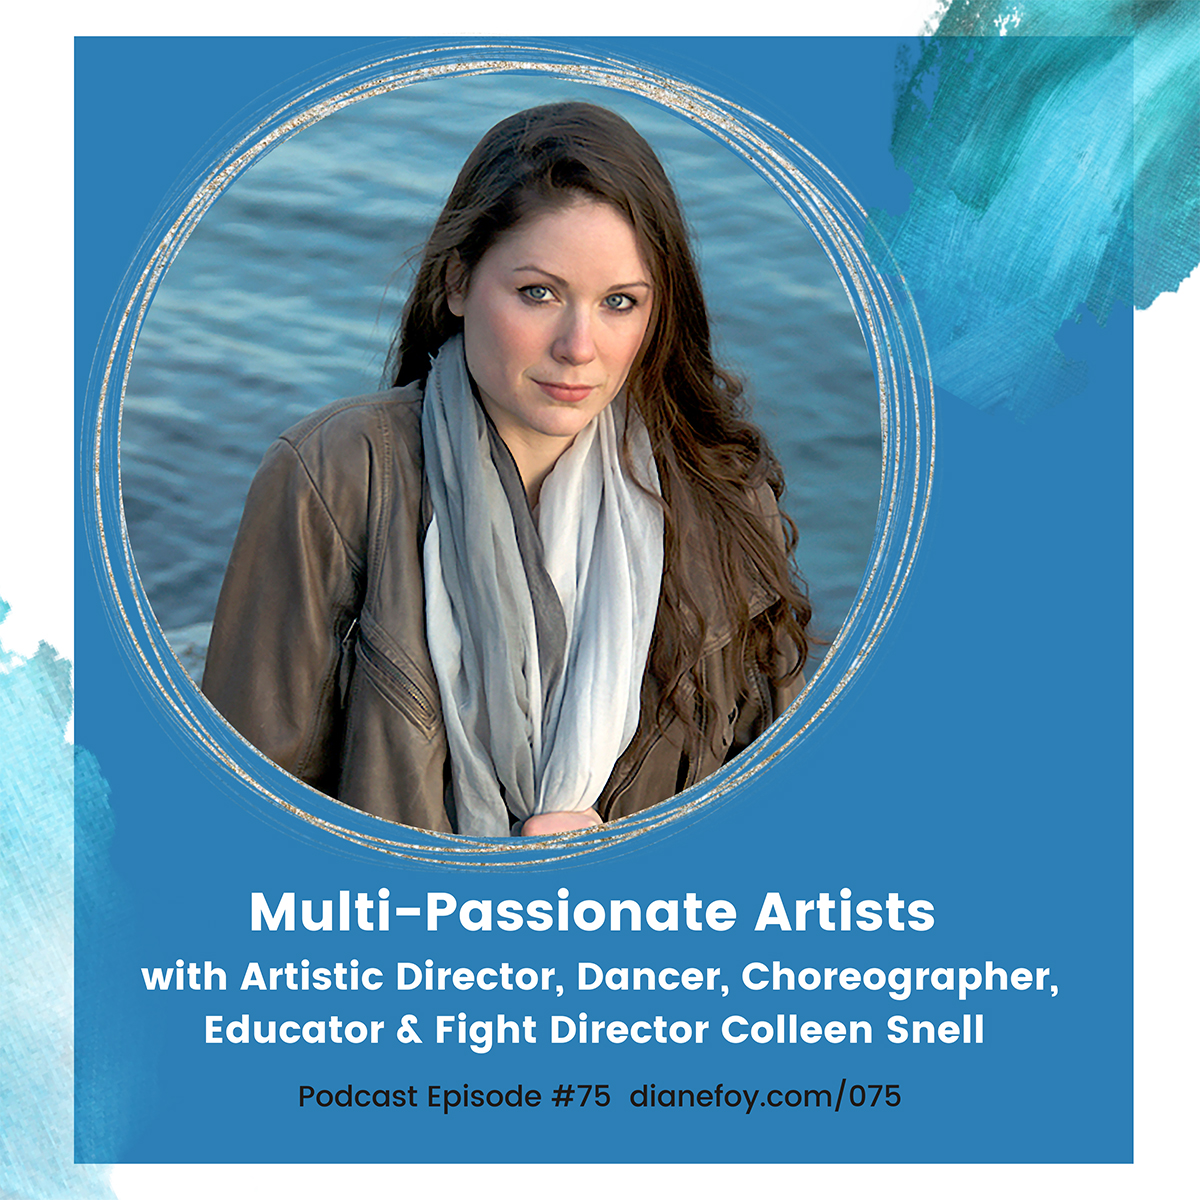 Artistic Director, Dancer, Choreographer, Educator & Fight Director Colleen Snell from Frog in Hand on Multi-passionate artists podcast with Diane Foy